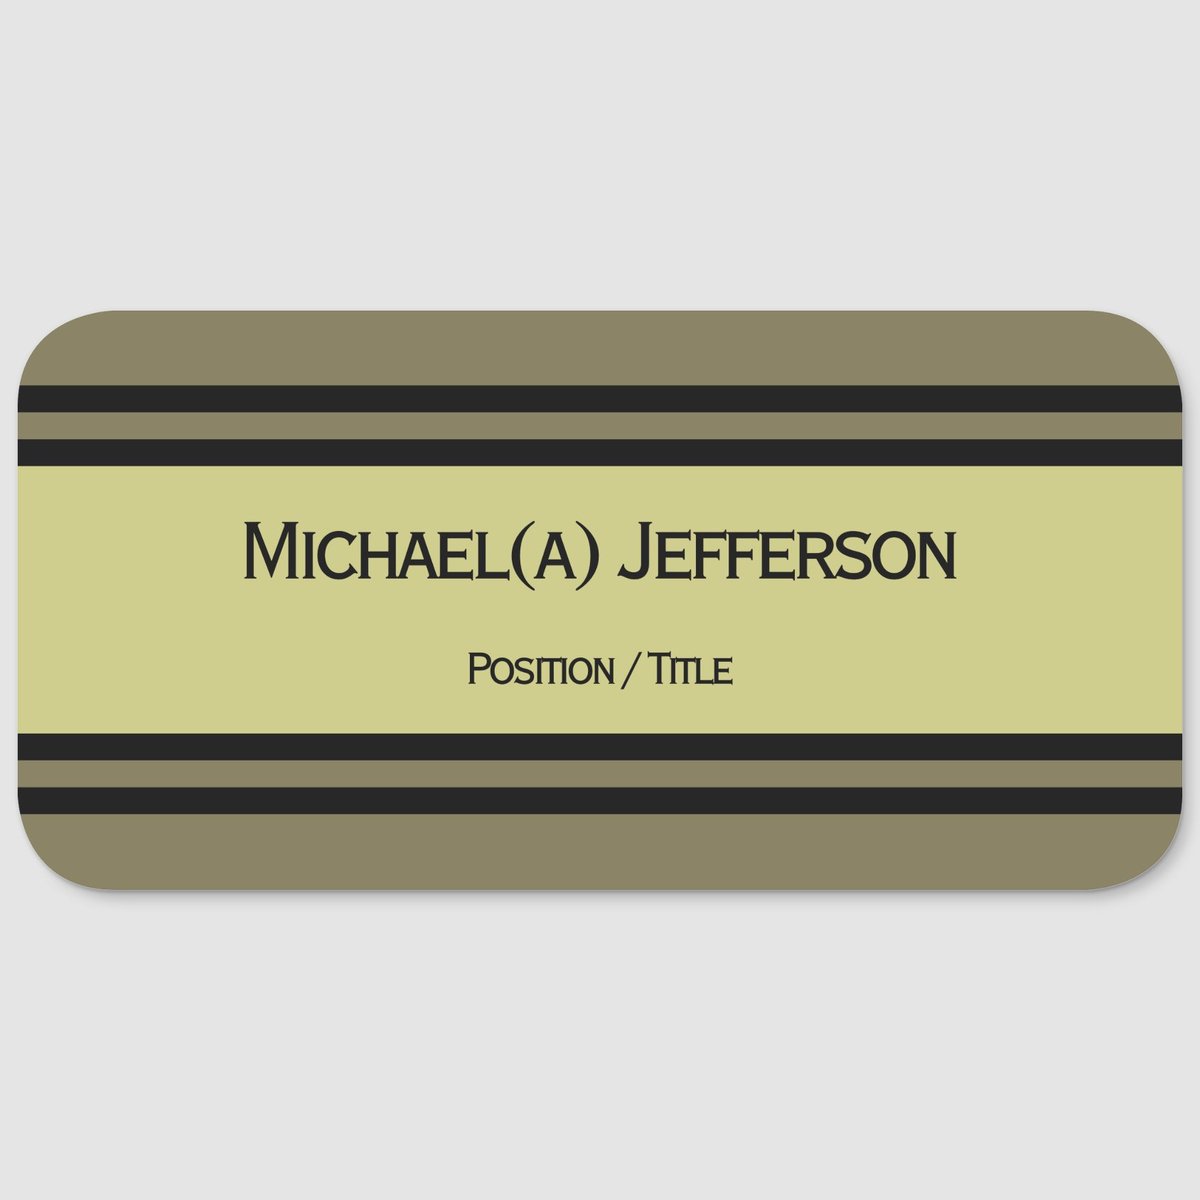 Wild Willow Green  zazzle.com/wild_willow_gr… The balance between urban chic and natural elegance #nametag or as a #Personalizedgift for #corporate #employees  #Professional #identity for every team #nametags Give a #corporategift #zazzlemade #zazzle #BusinessMan #BusinessSolutions